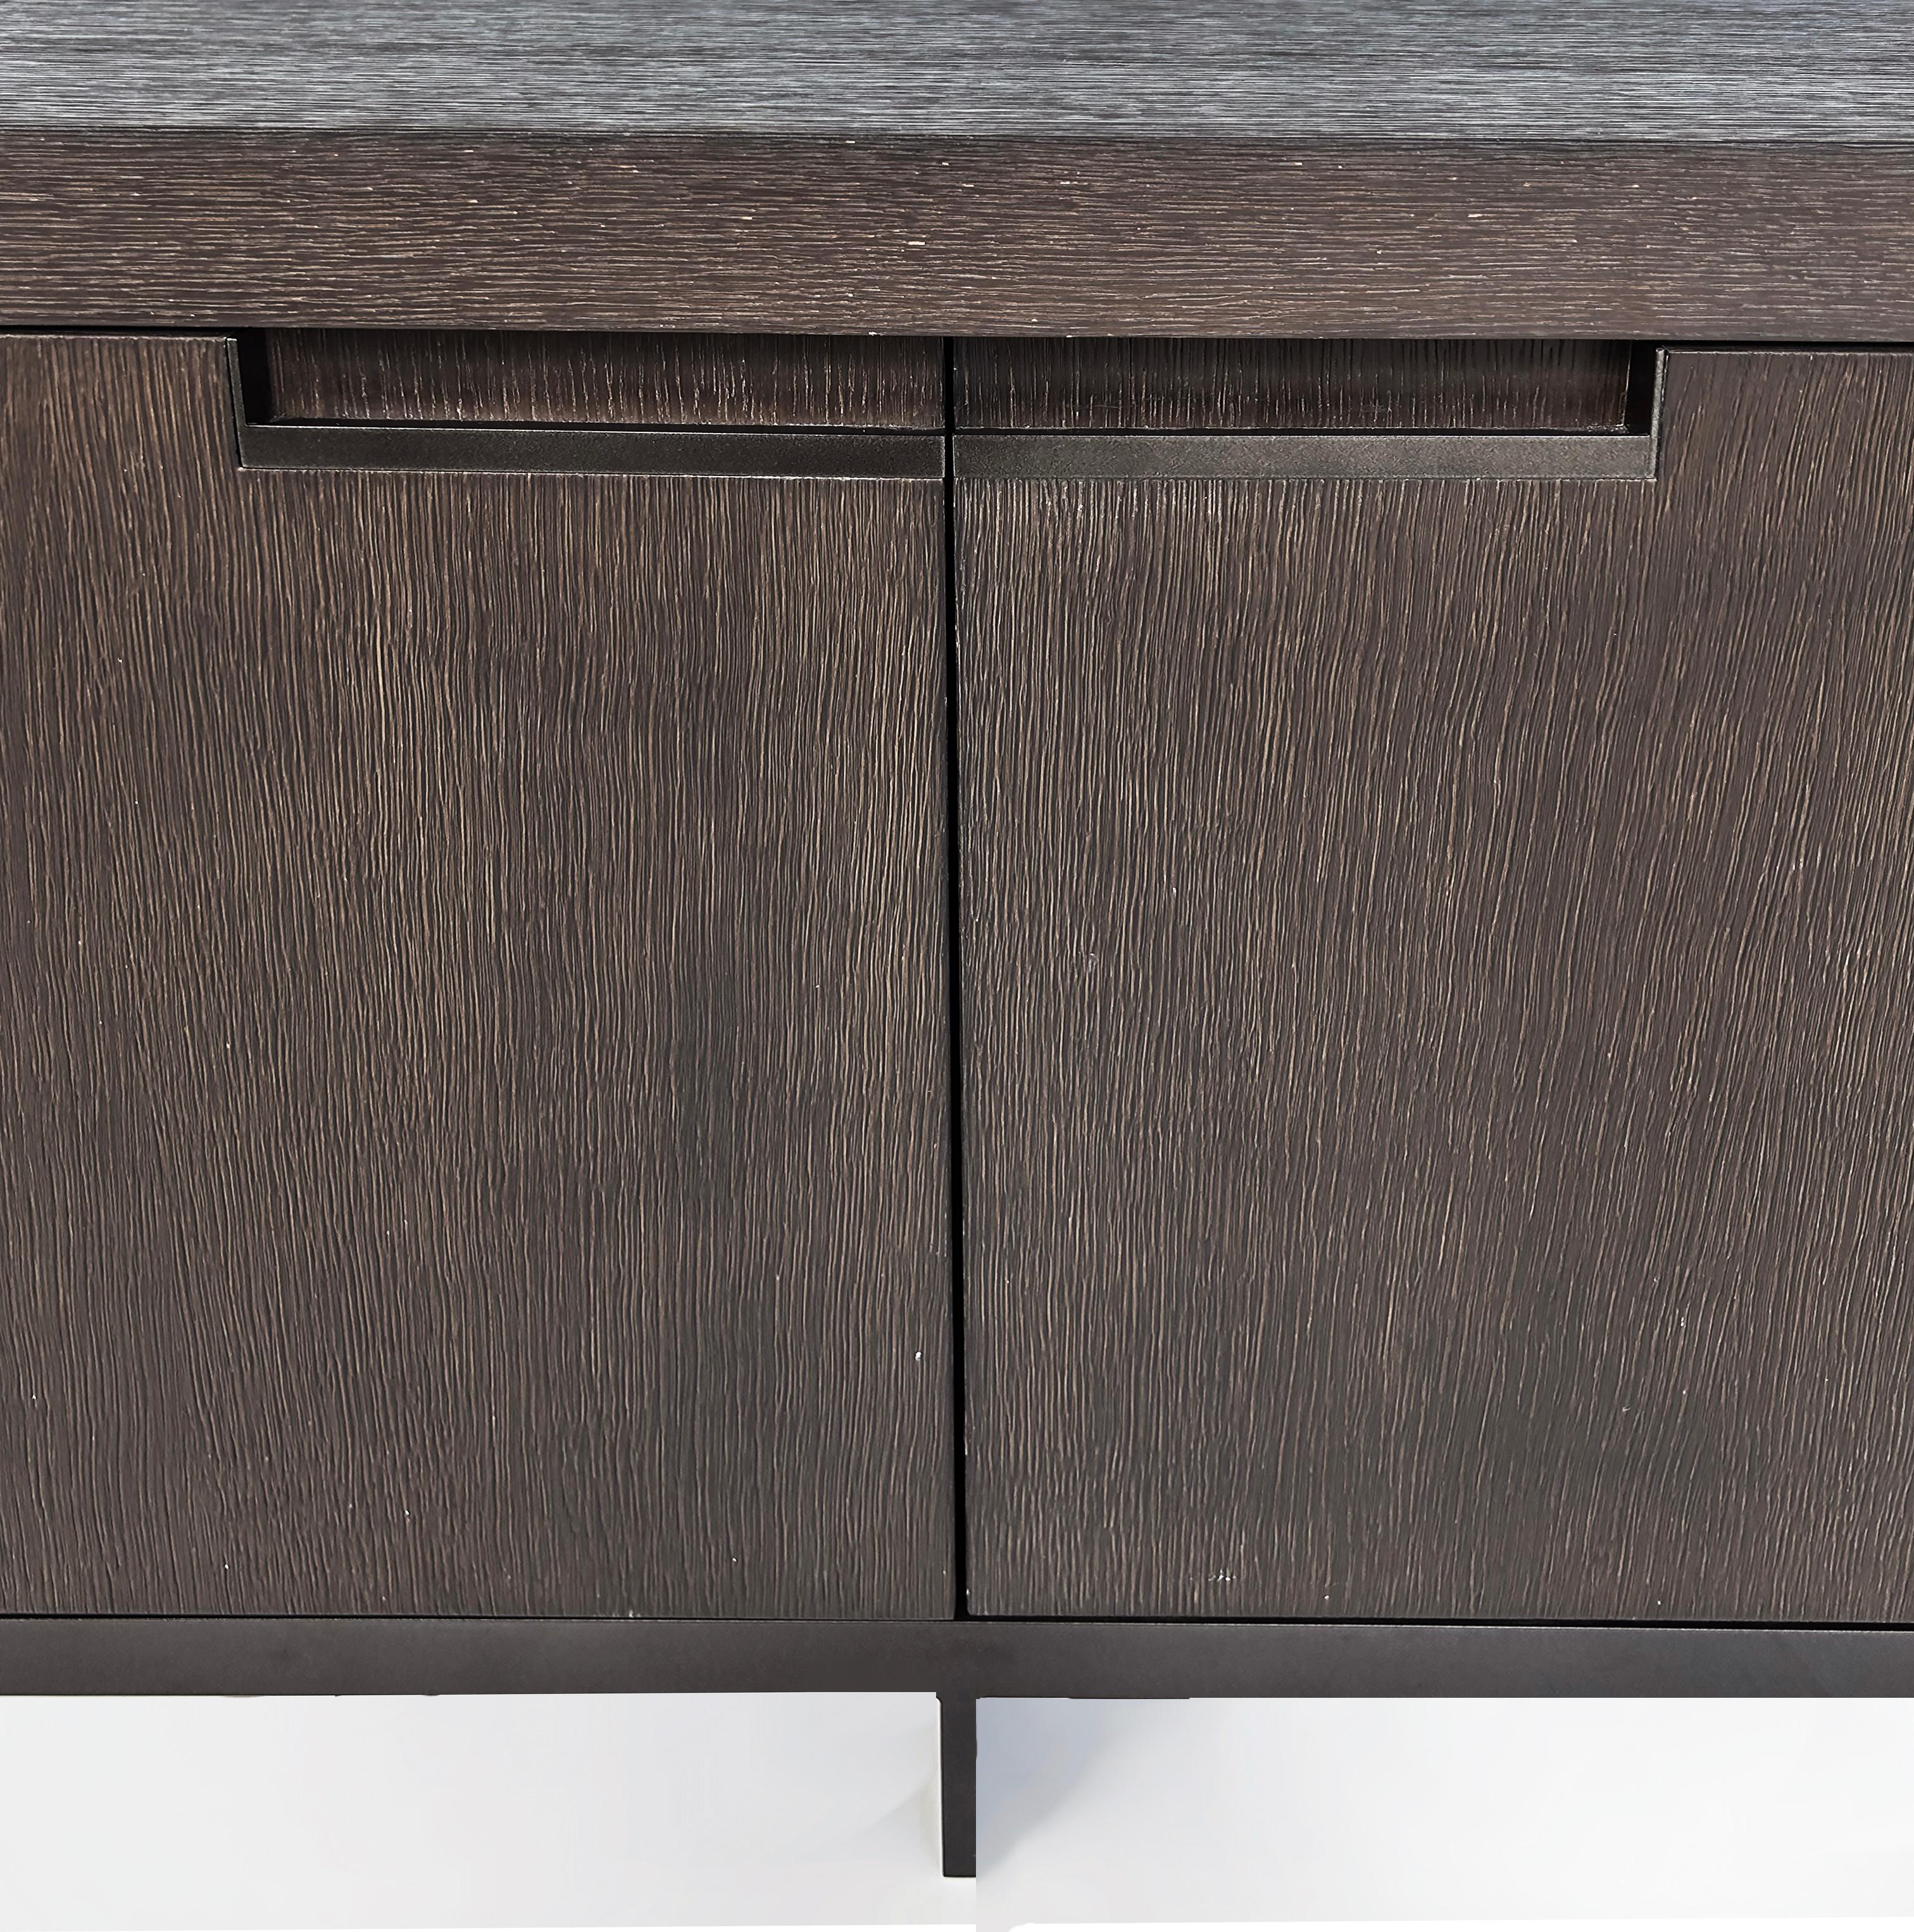 French Christian Liaigre Tangris Credenza Cabinet, Sandblasted Oak and Metal